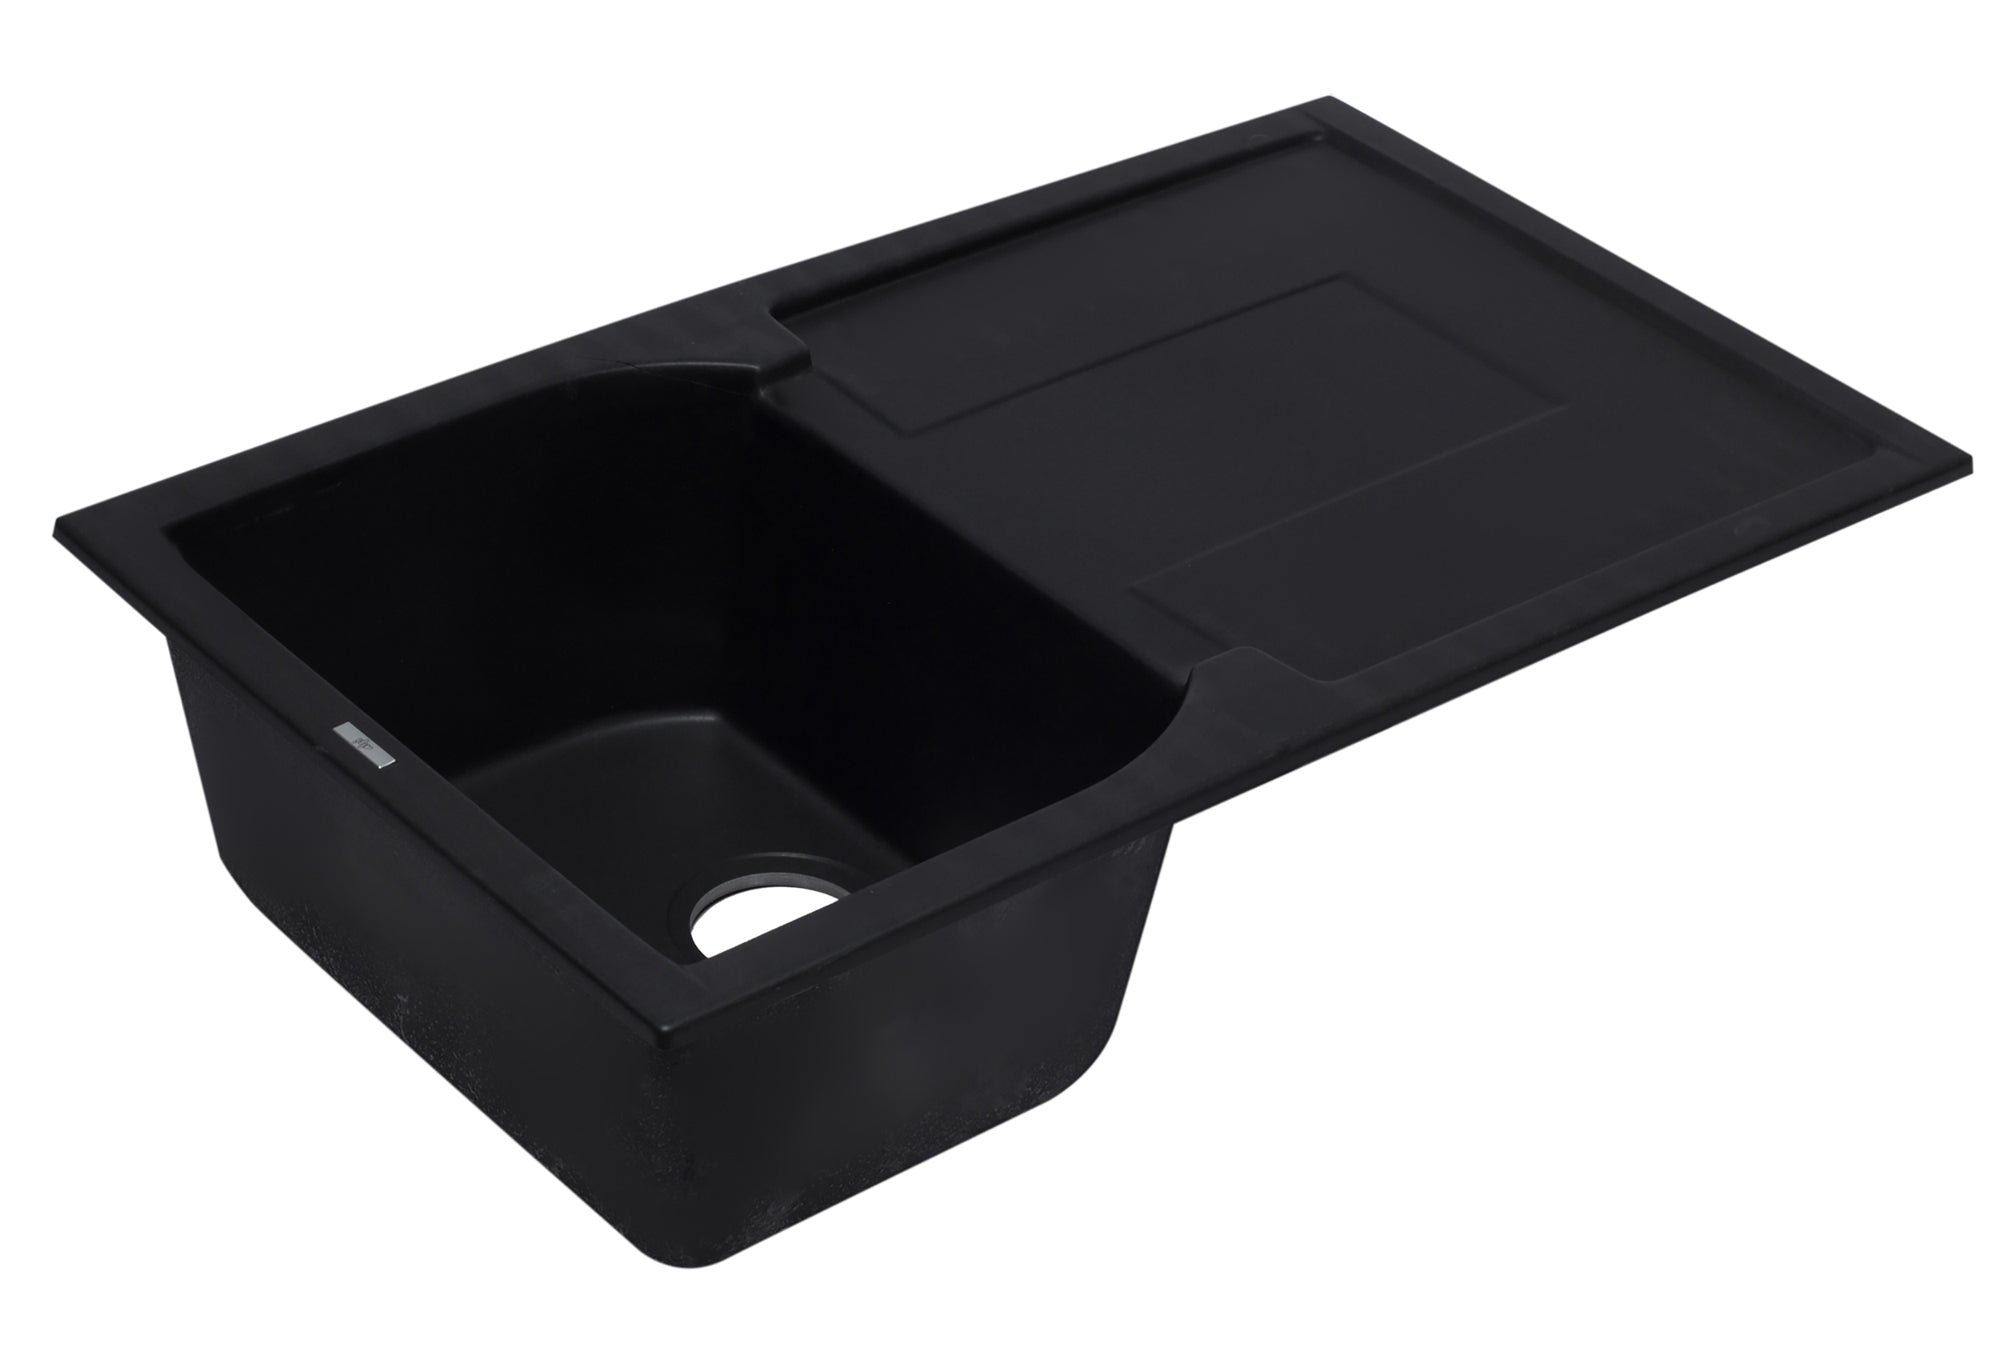 34'' Single Bowl Granite Composite Kitchen Sink with Drainboard in Biscuit,  Black, White, Chocolate or Titanium finish by Alfi brand